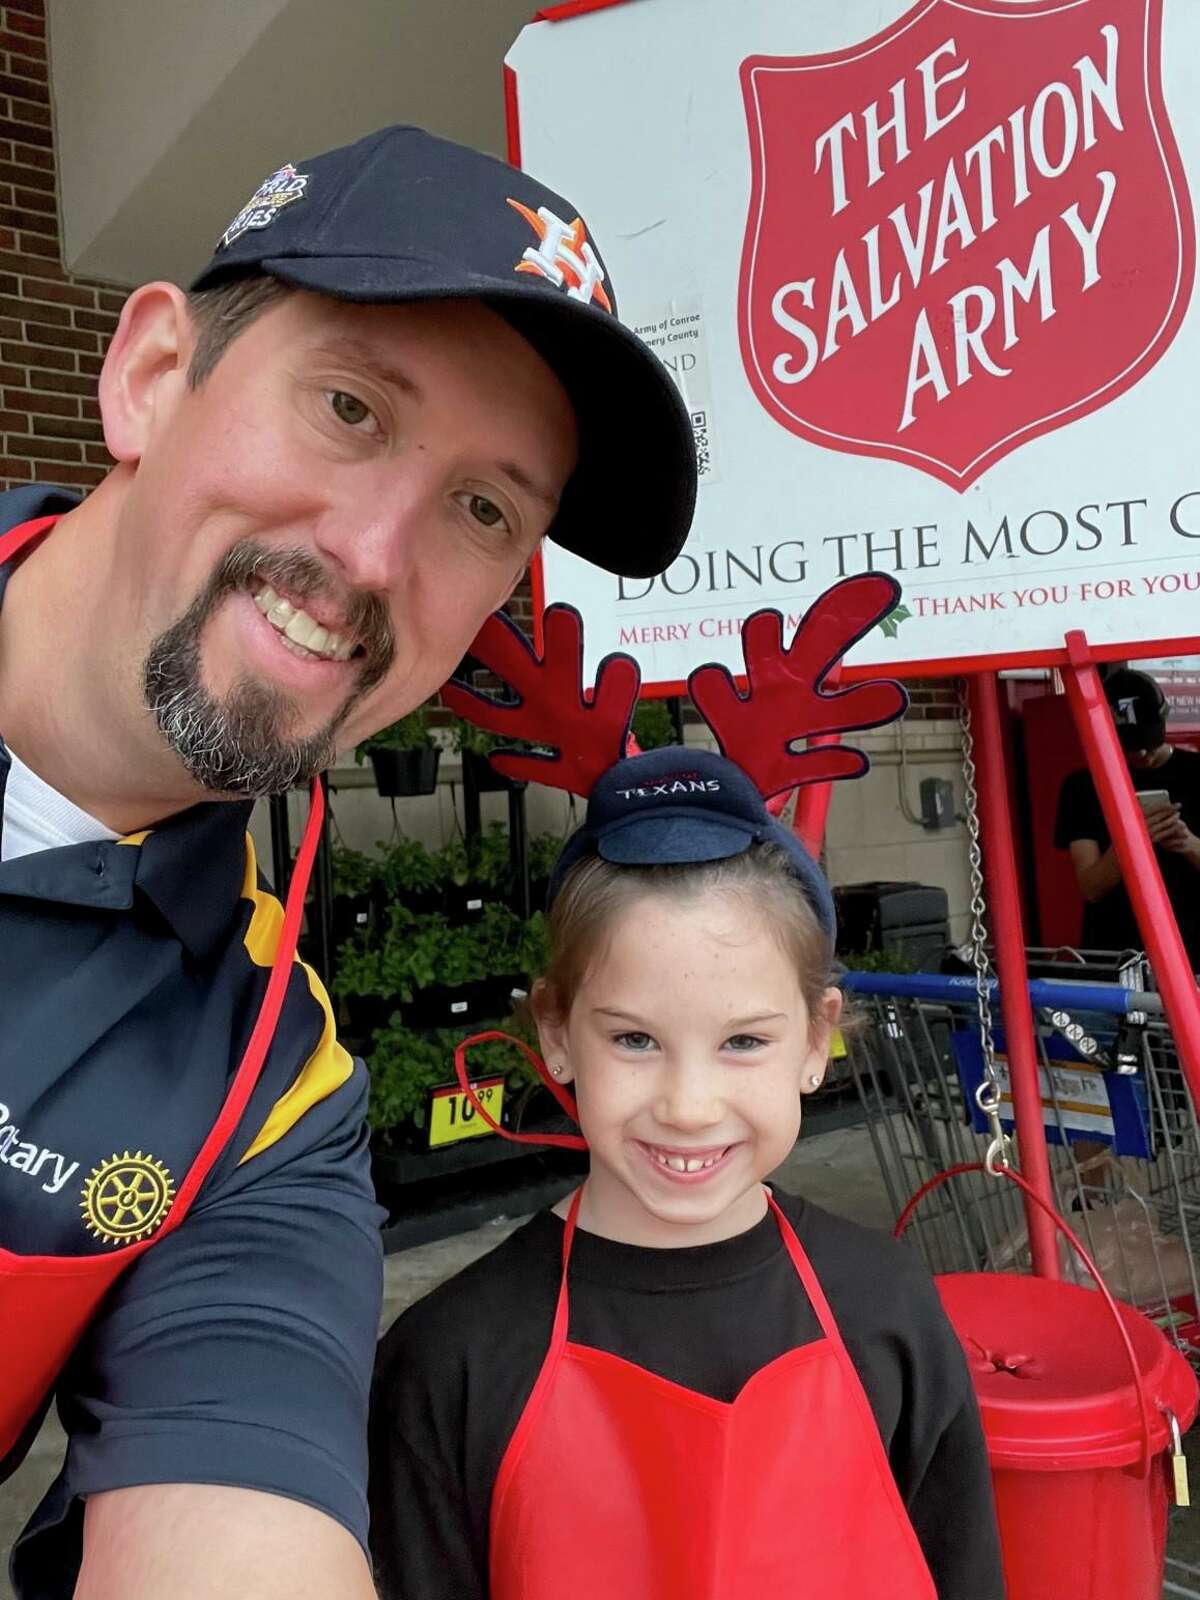 Conroe Rotarian Nick Davis is now also the Chairman of the Conroe Lake Conroe Chamber of Commerce Executive Board. He’s pictured here with his daughter, Tris, ringing the bell for the Salvation Army in December.